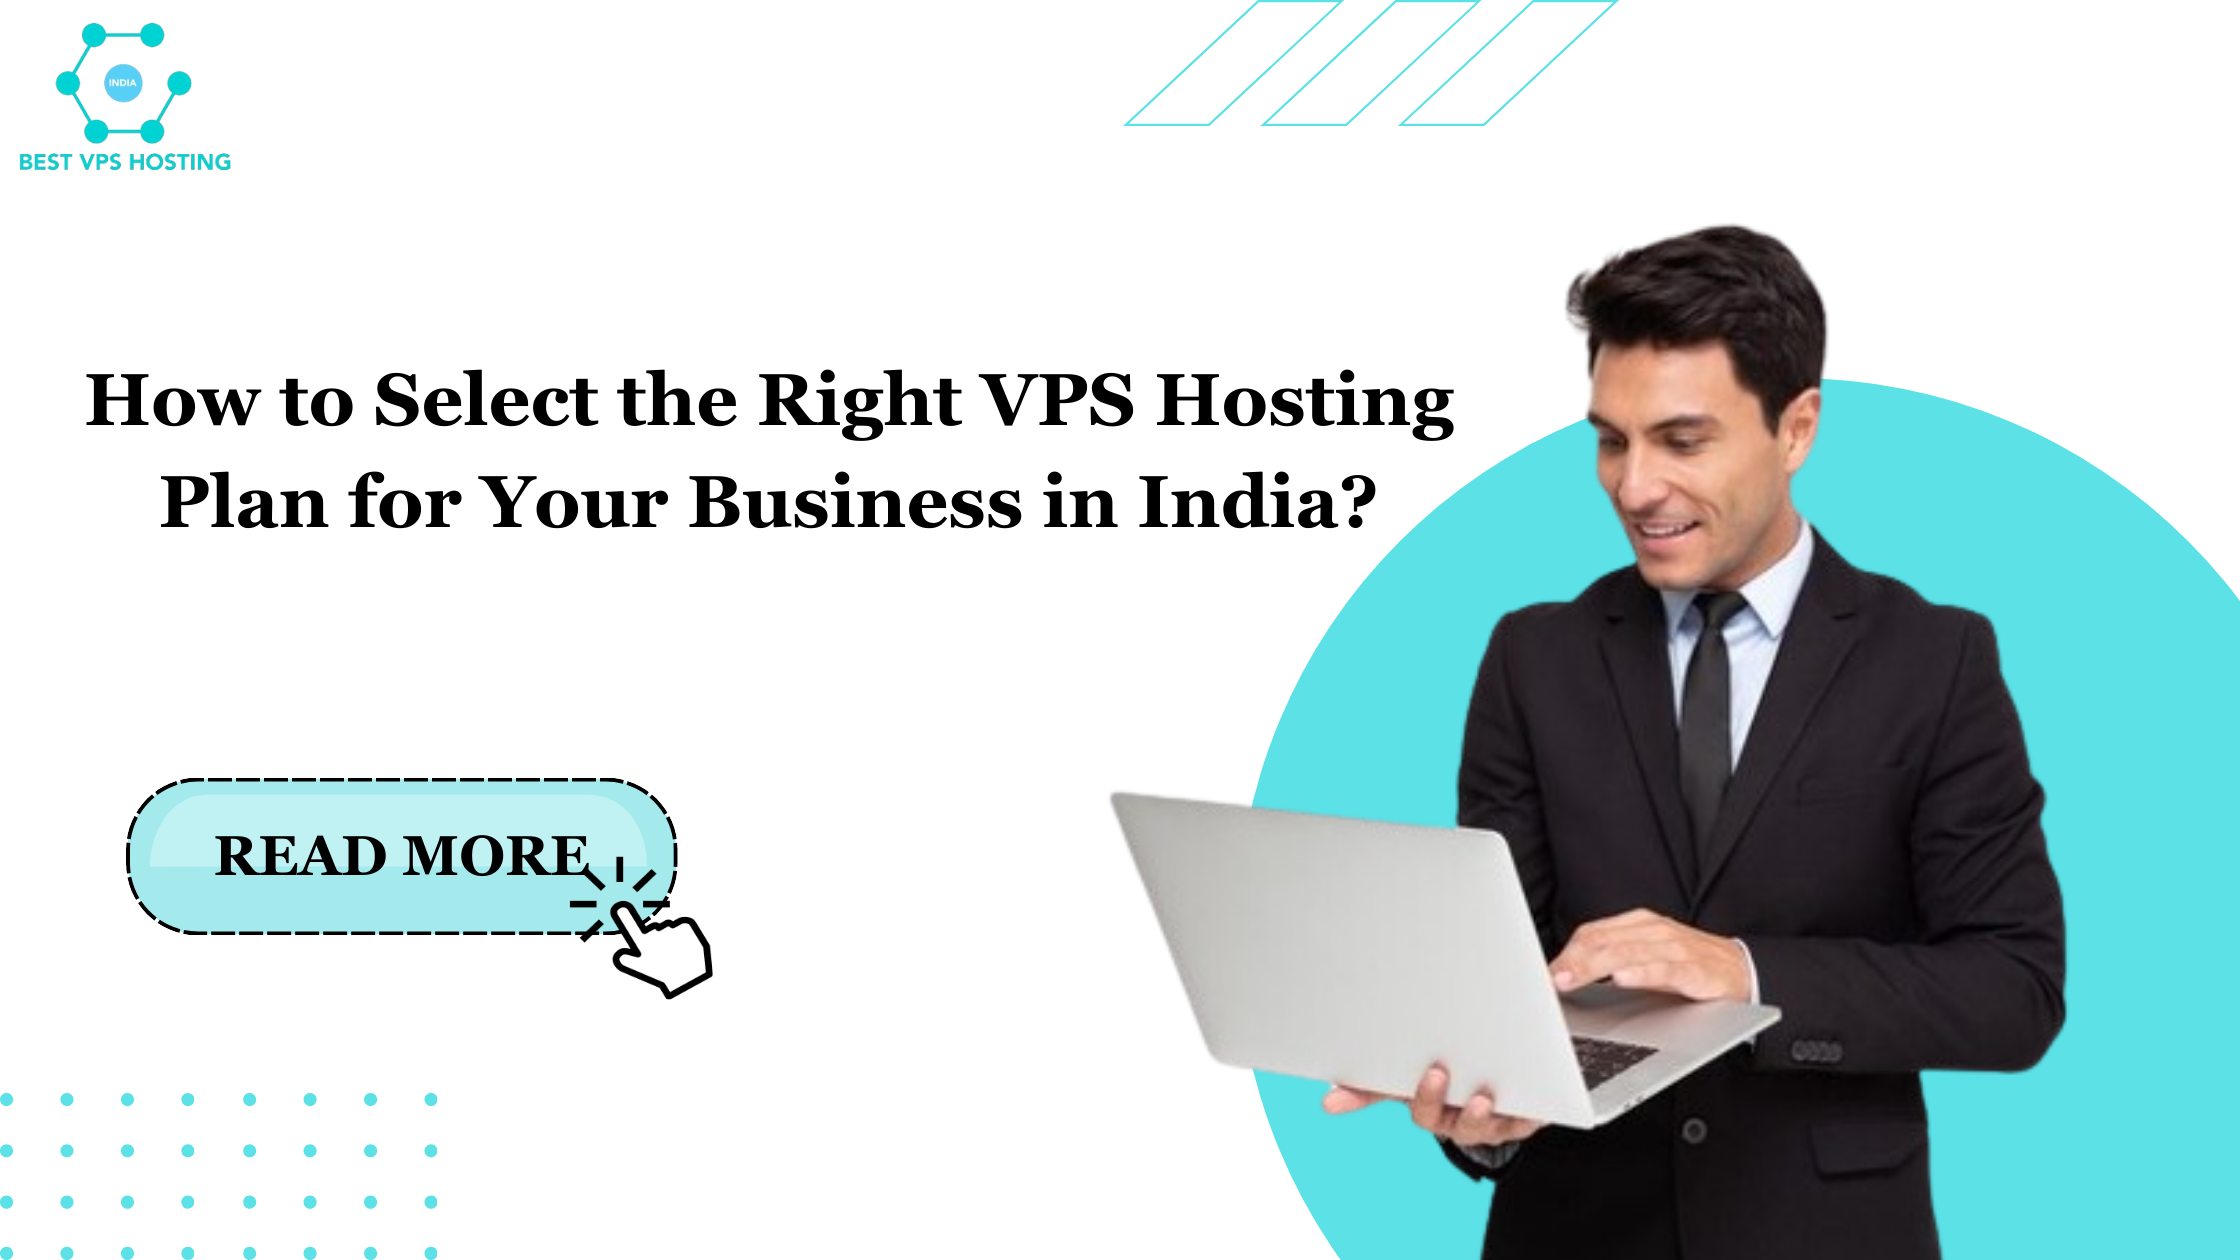 How to Select the Right VPS Hosting Plan for Your Business in India